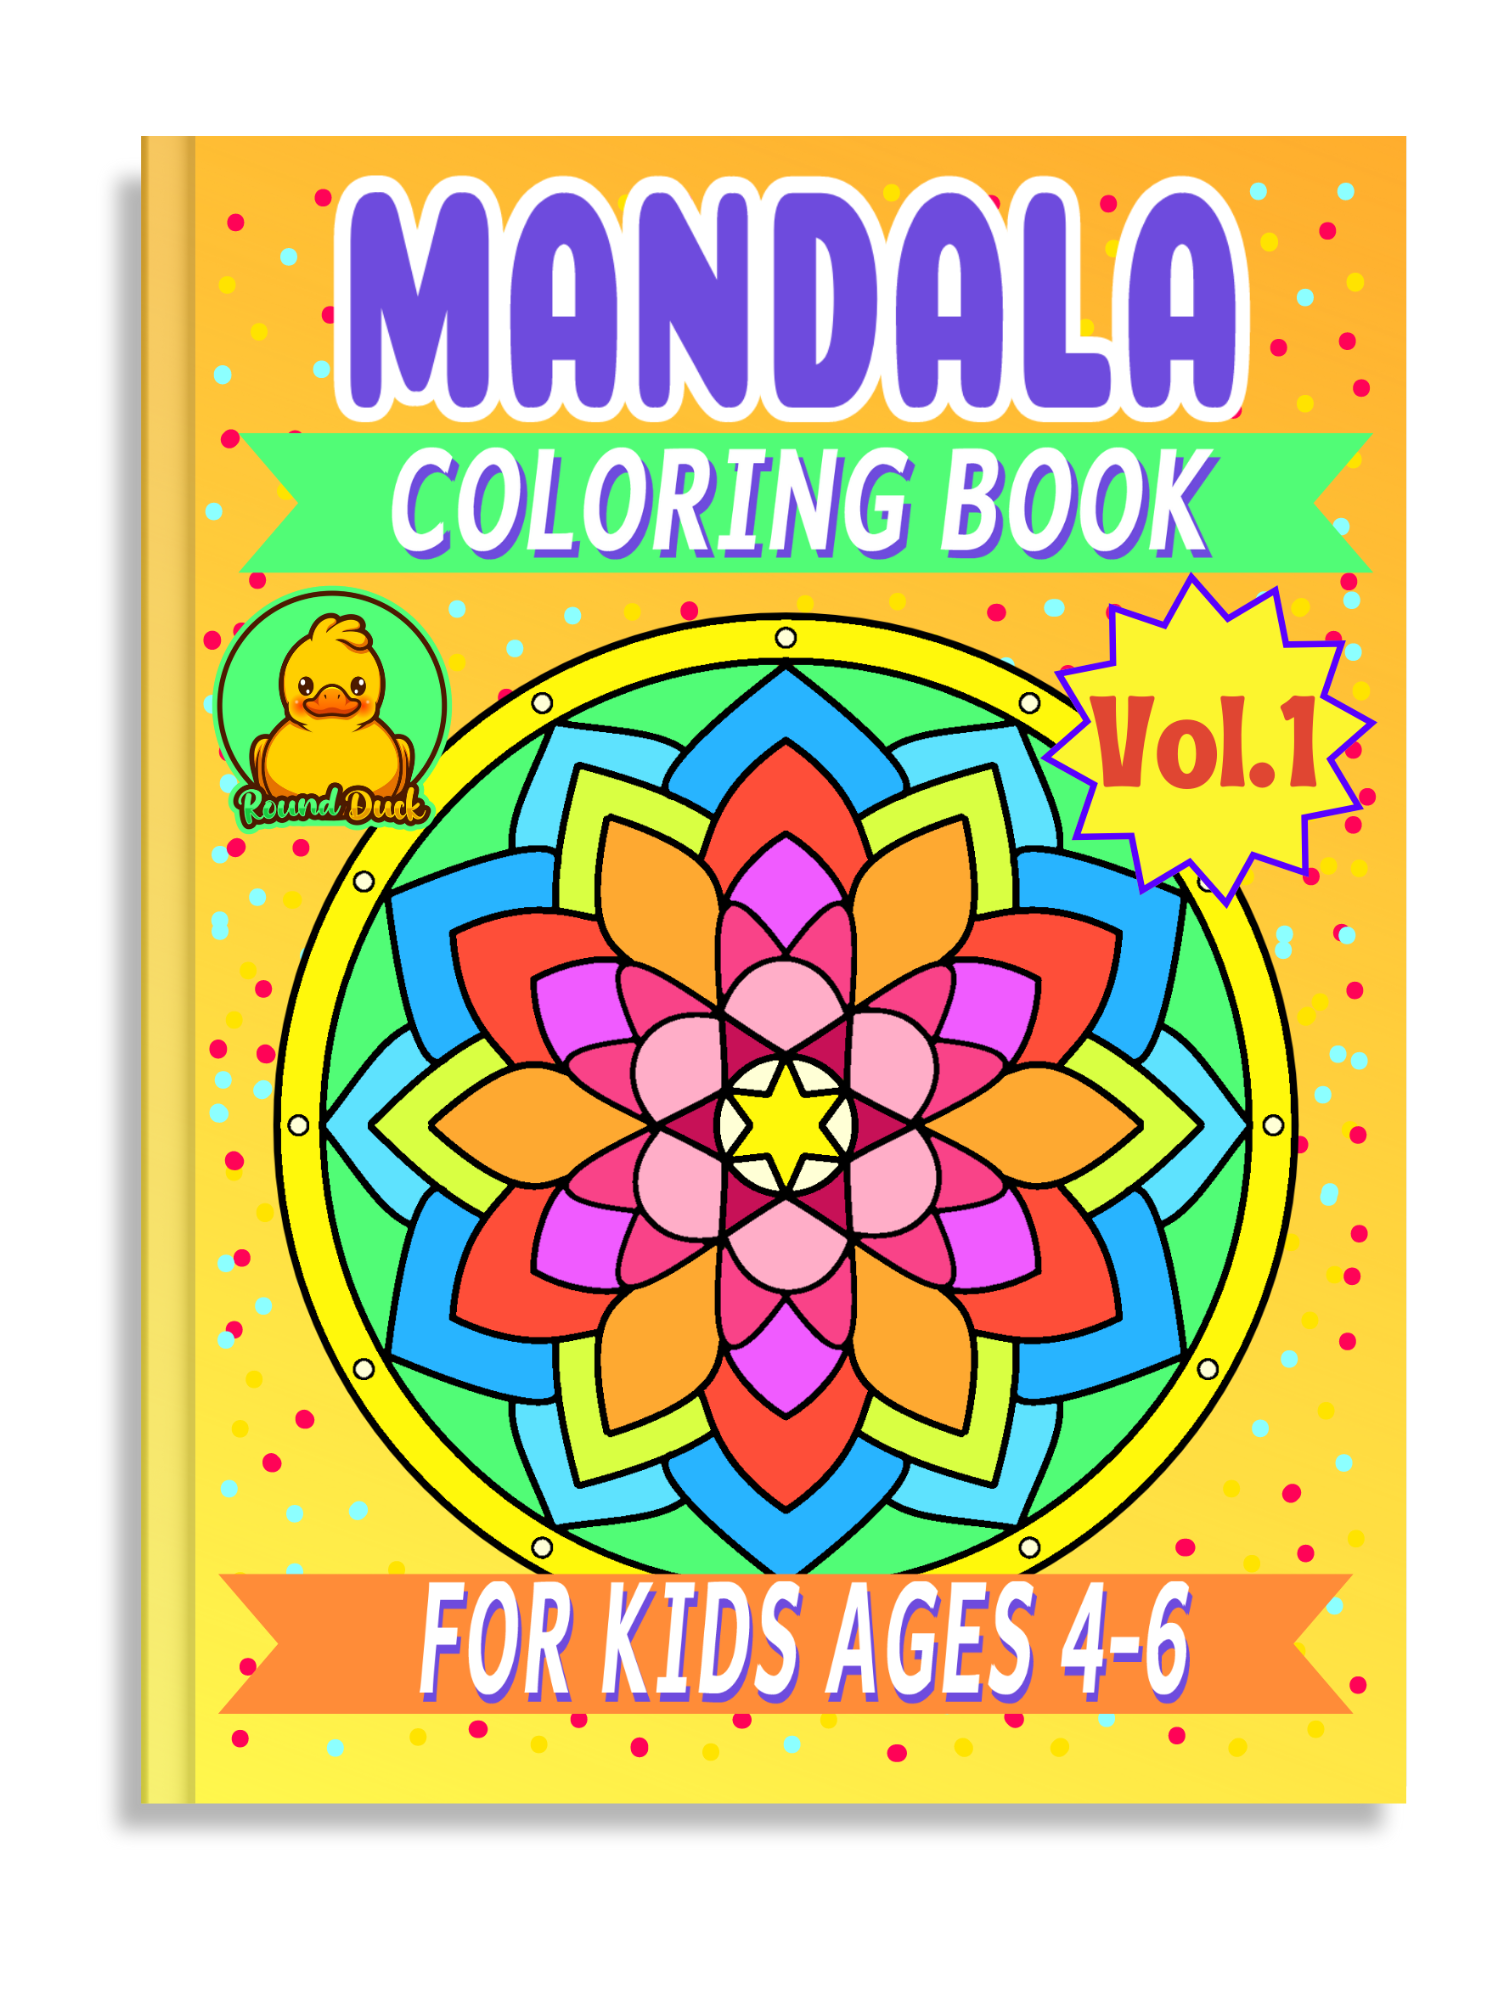 Mandala Coloring Book For Kids: For Kids Ages 4-8, 6-8, Coloring Books for  Kids, girls and boys by unknown author - Paperback - from Redux Books (SKU:  112401110026)